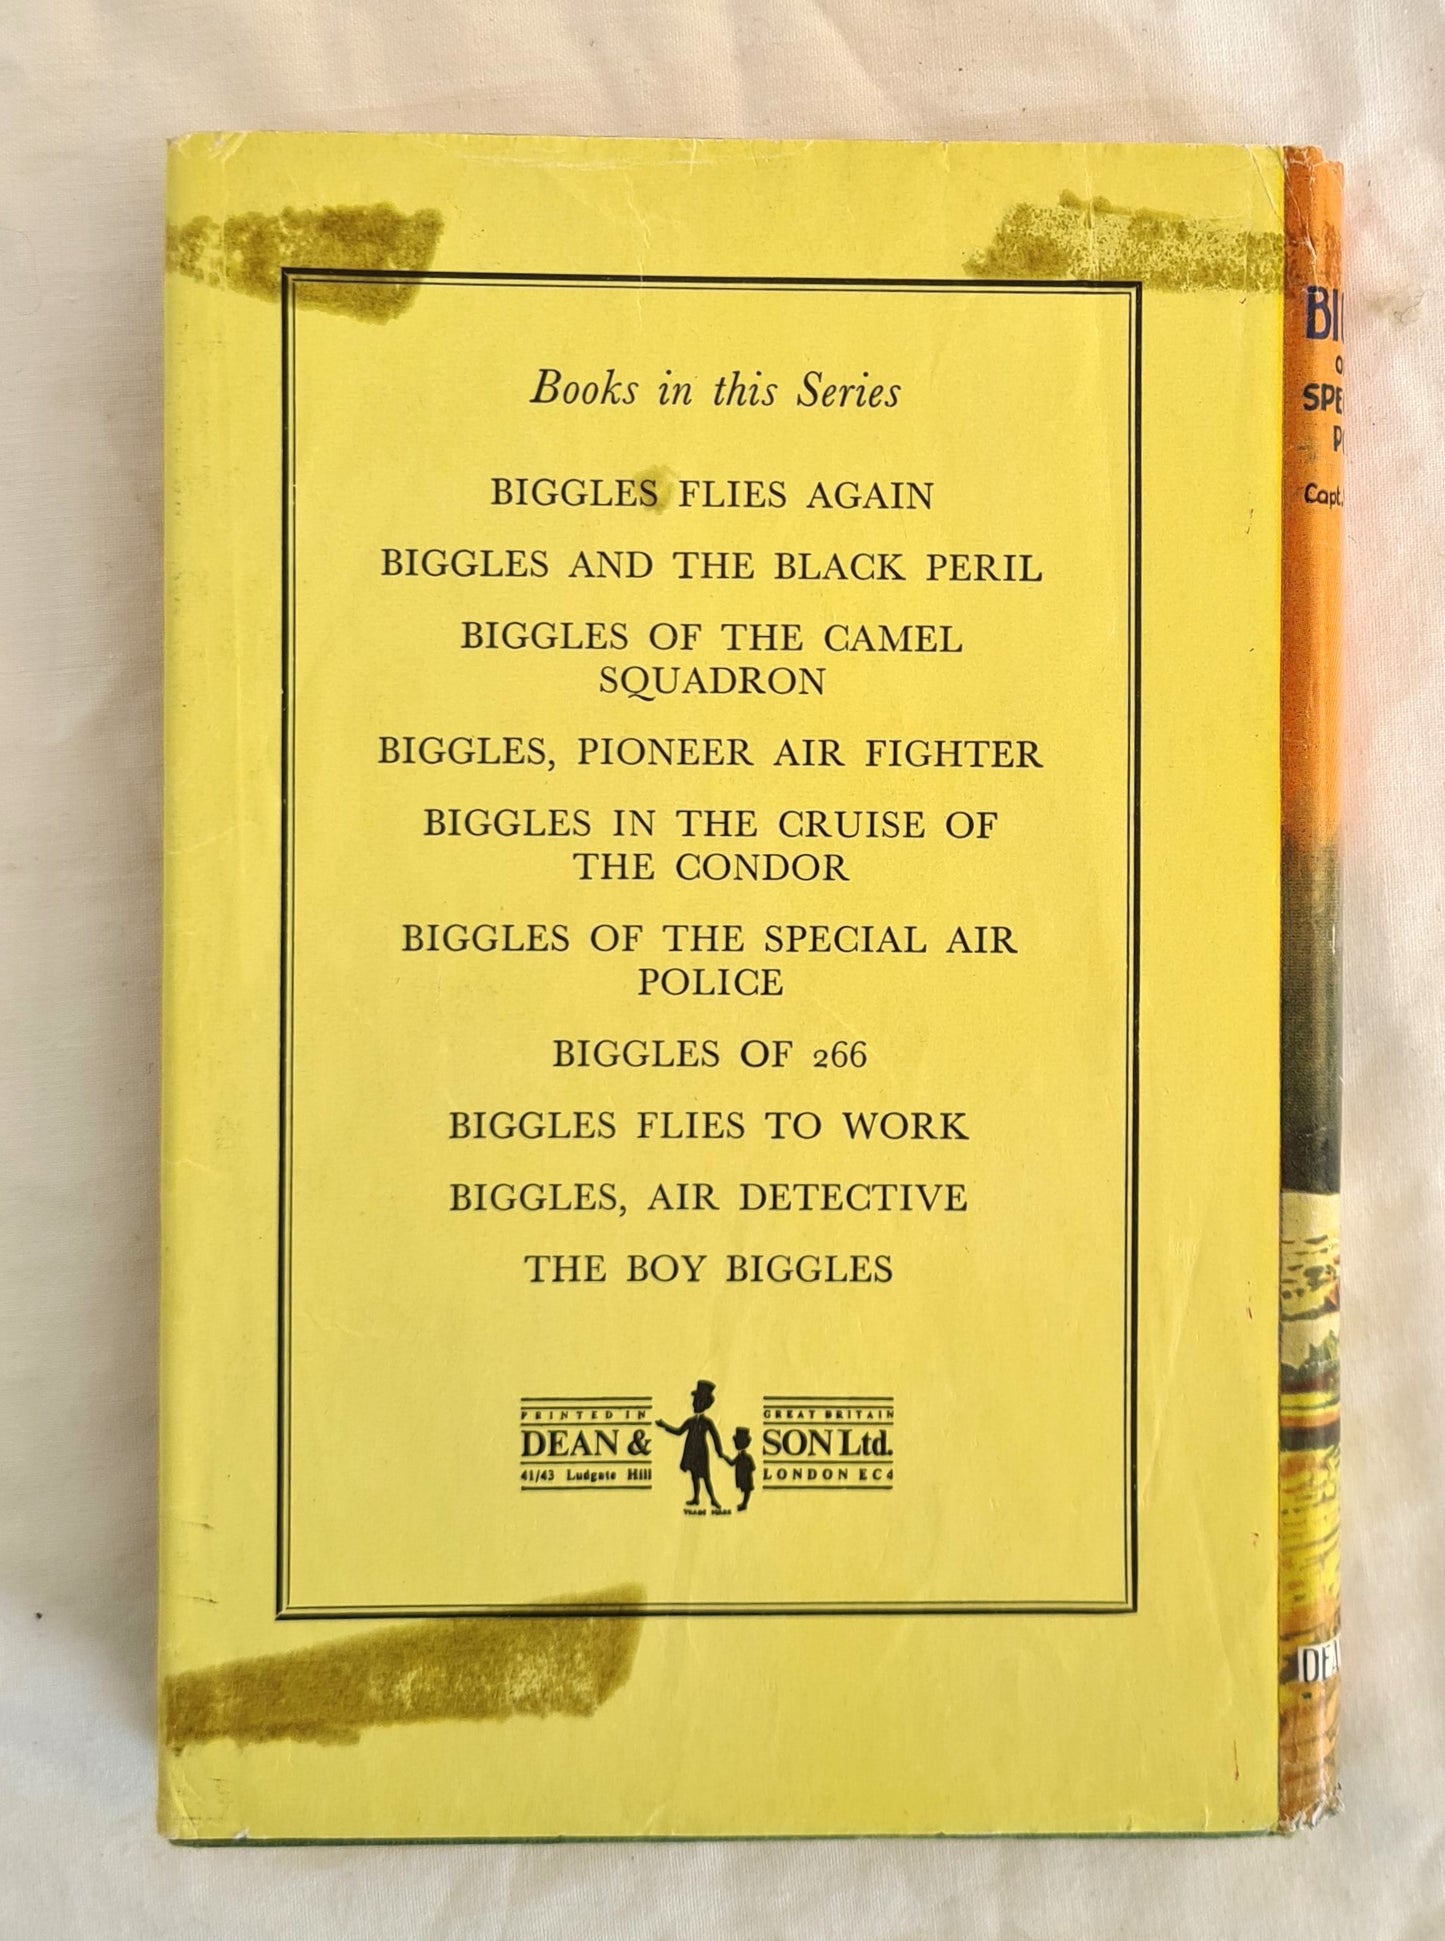 Biggles of the Special Air Police by Captain W. E. Johns (no inscriptions)